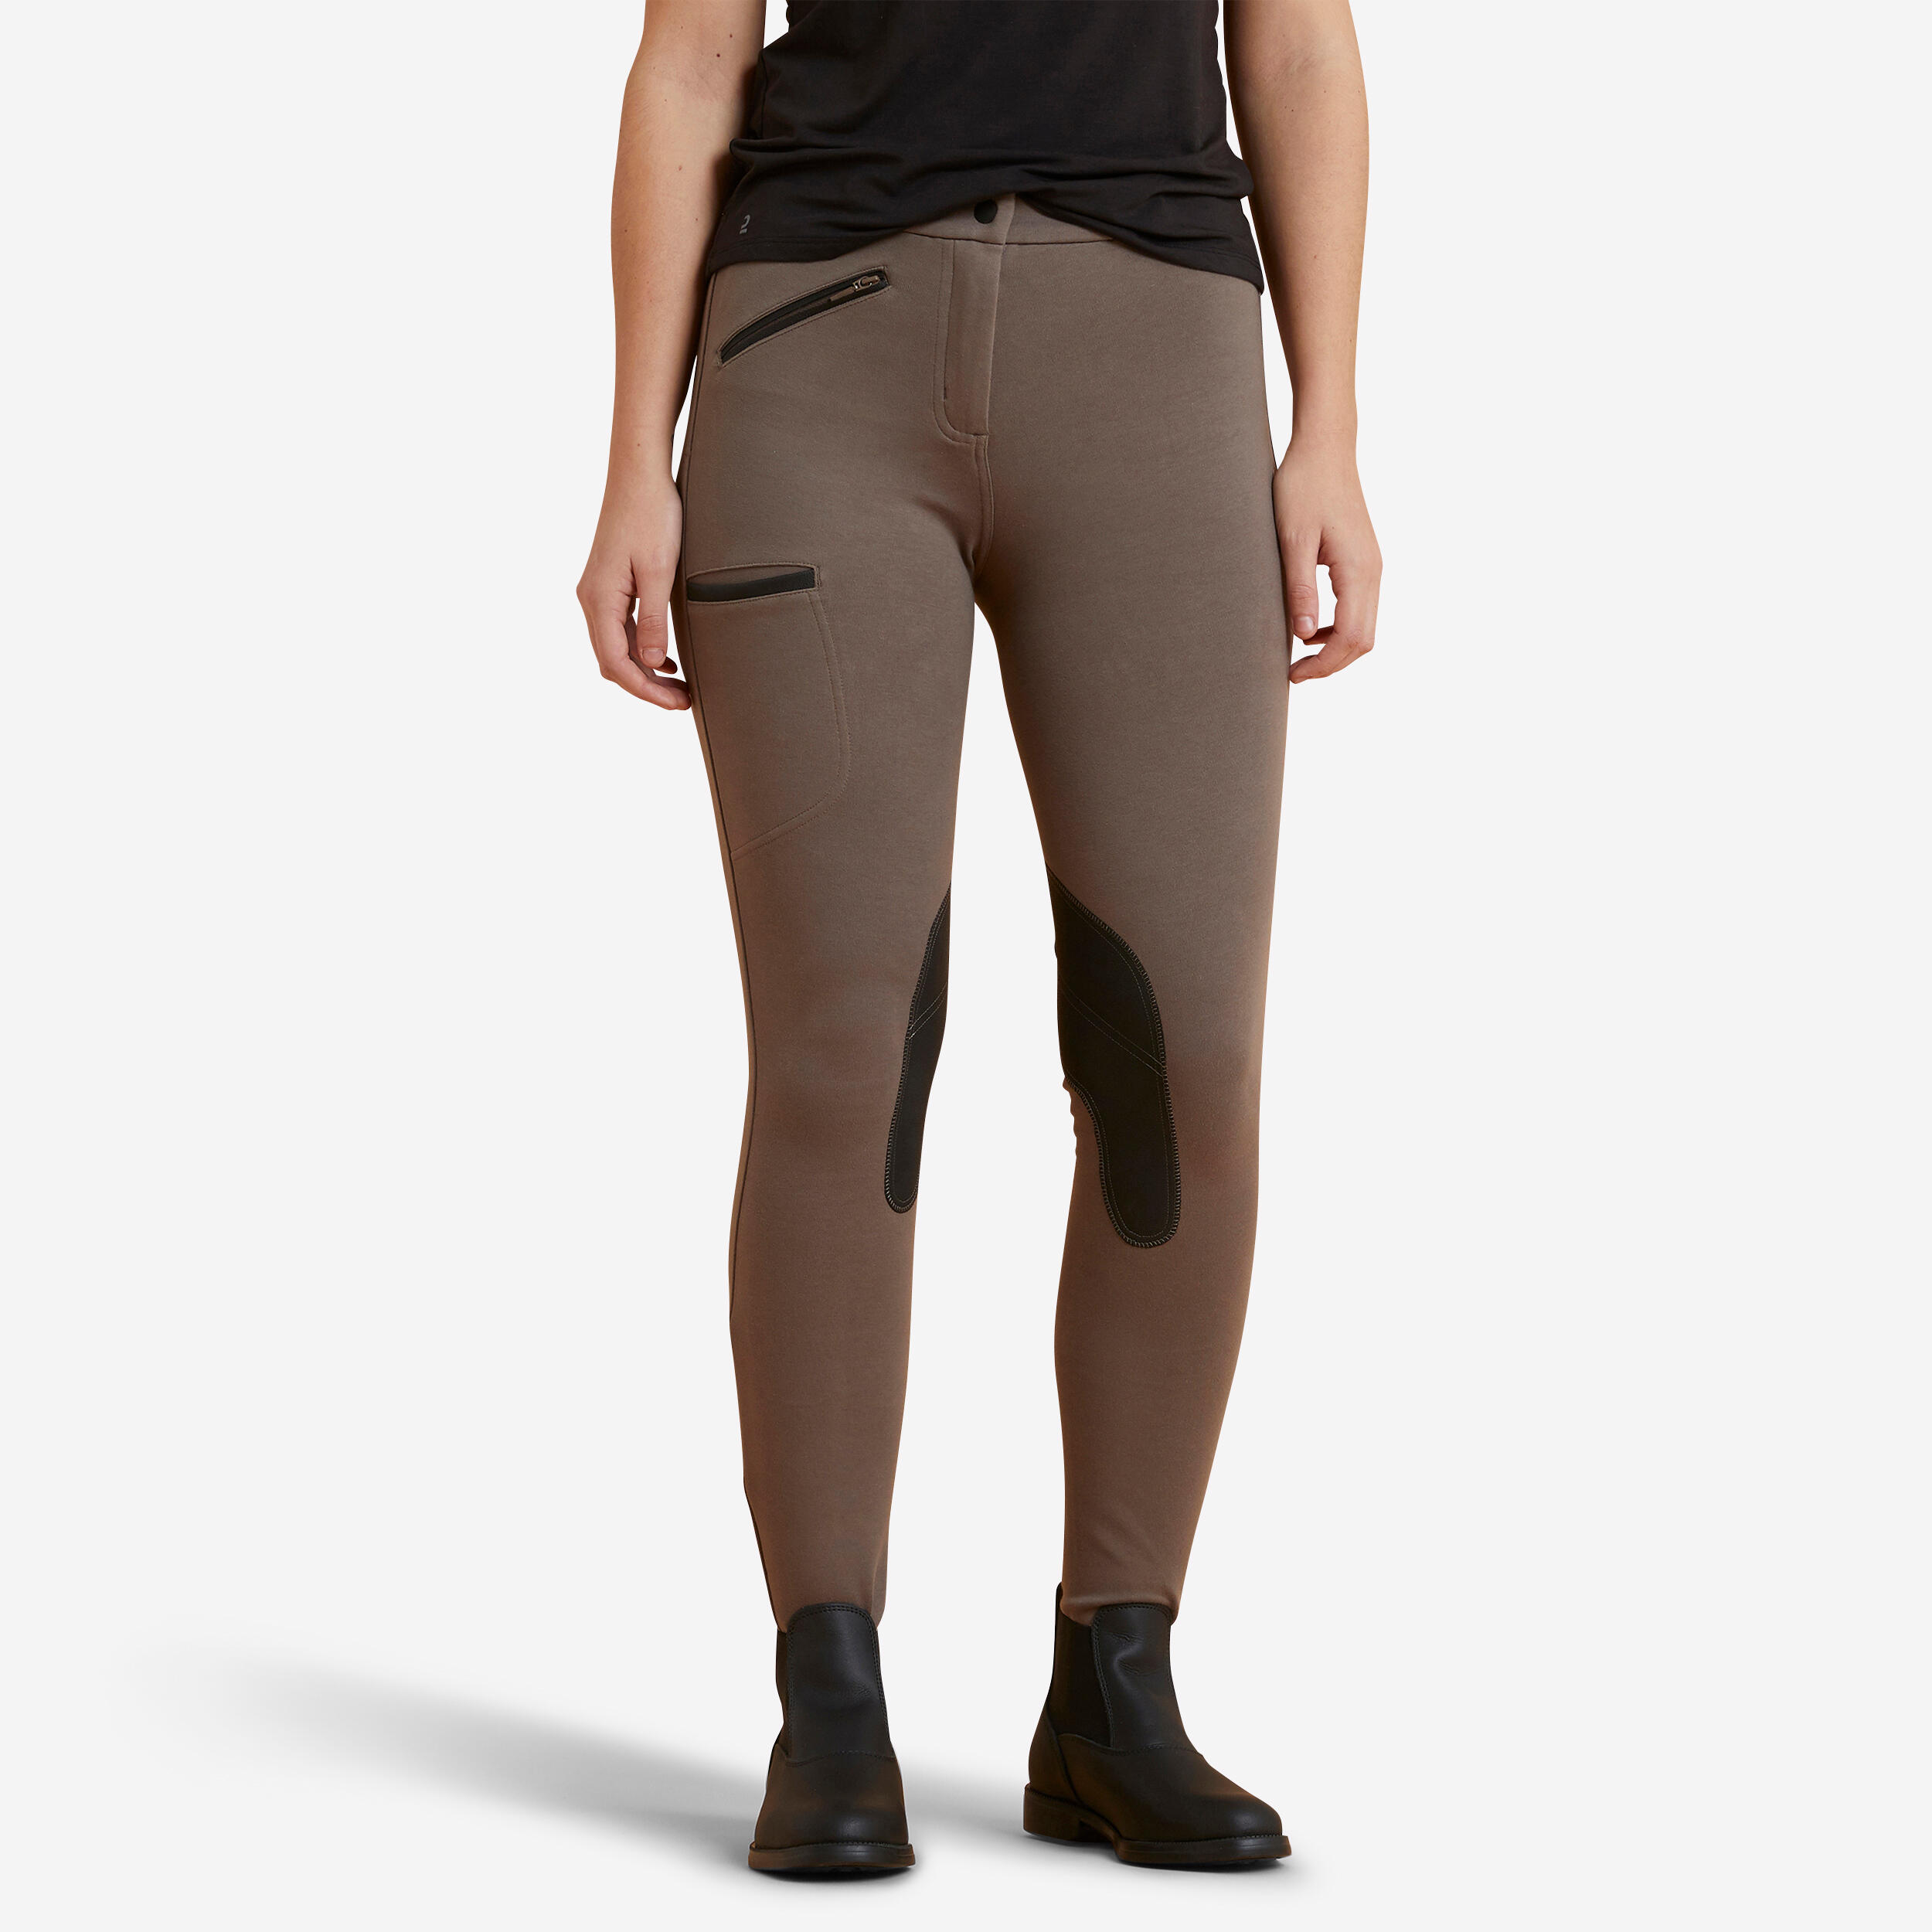 Which summer riding pants to choose? Horse Pilot